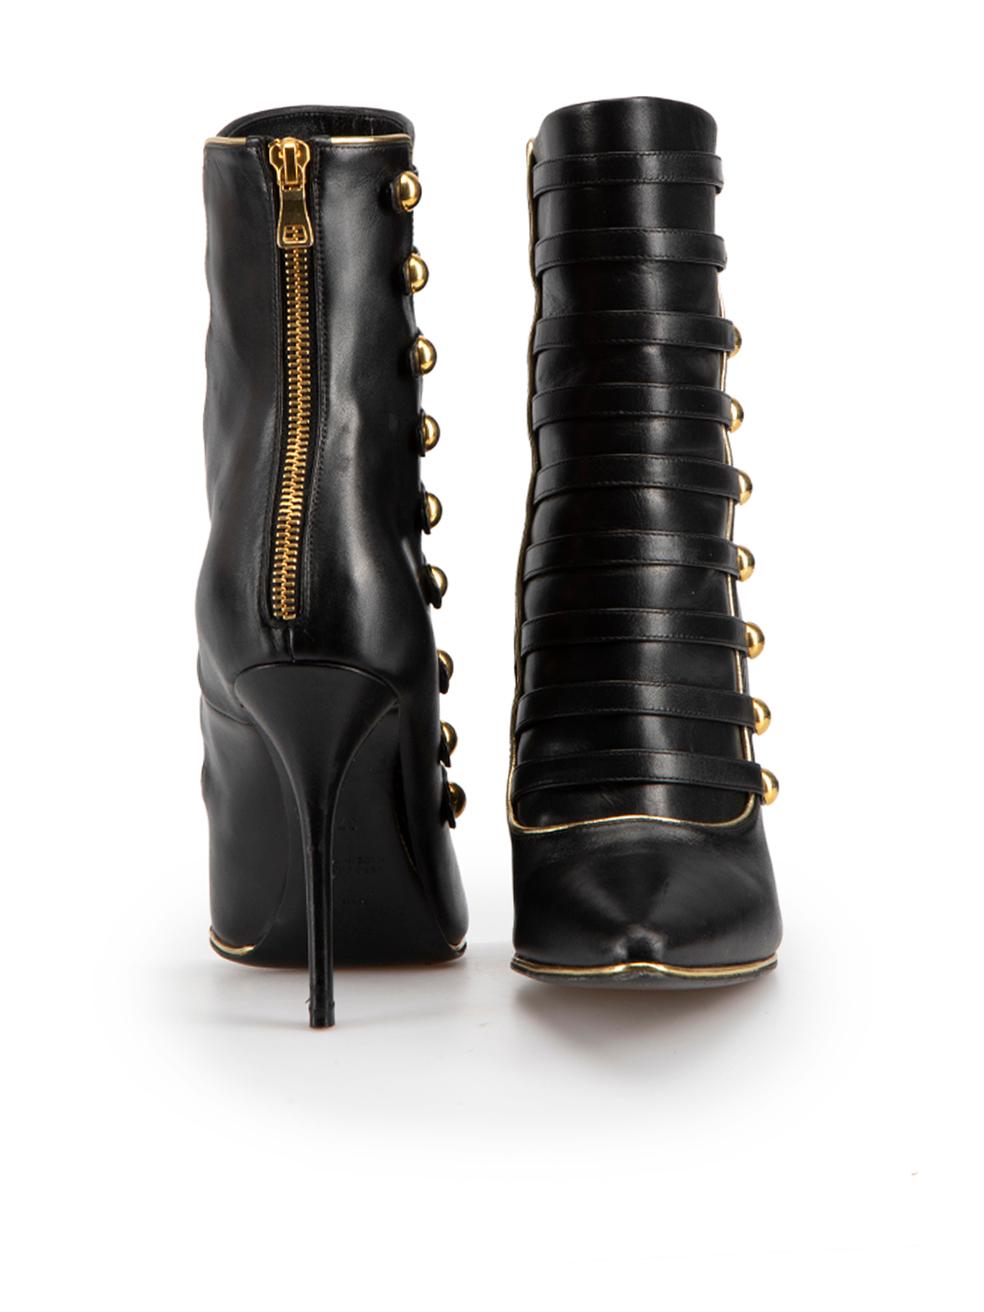 Balmain Black Military Heeled Mid Calf Boots Size IT 37 In Excellent Condition For Sale In London, GB